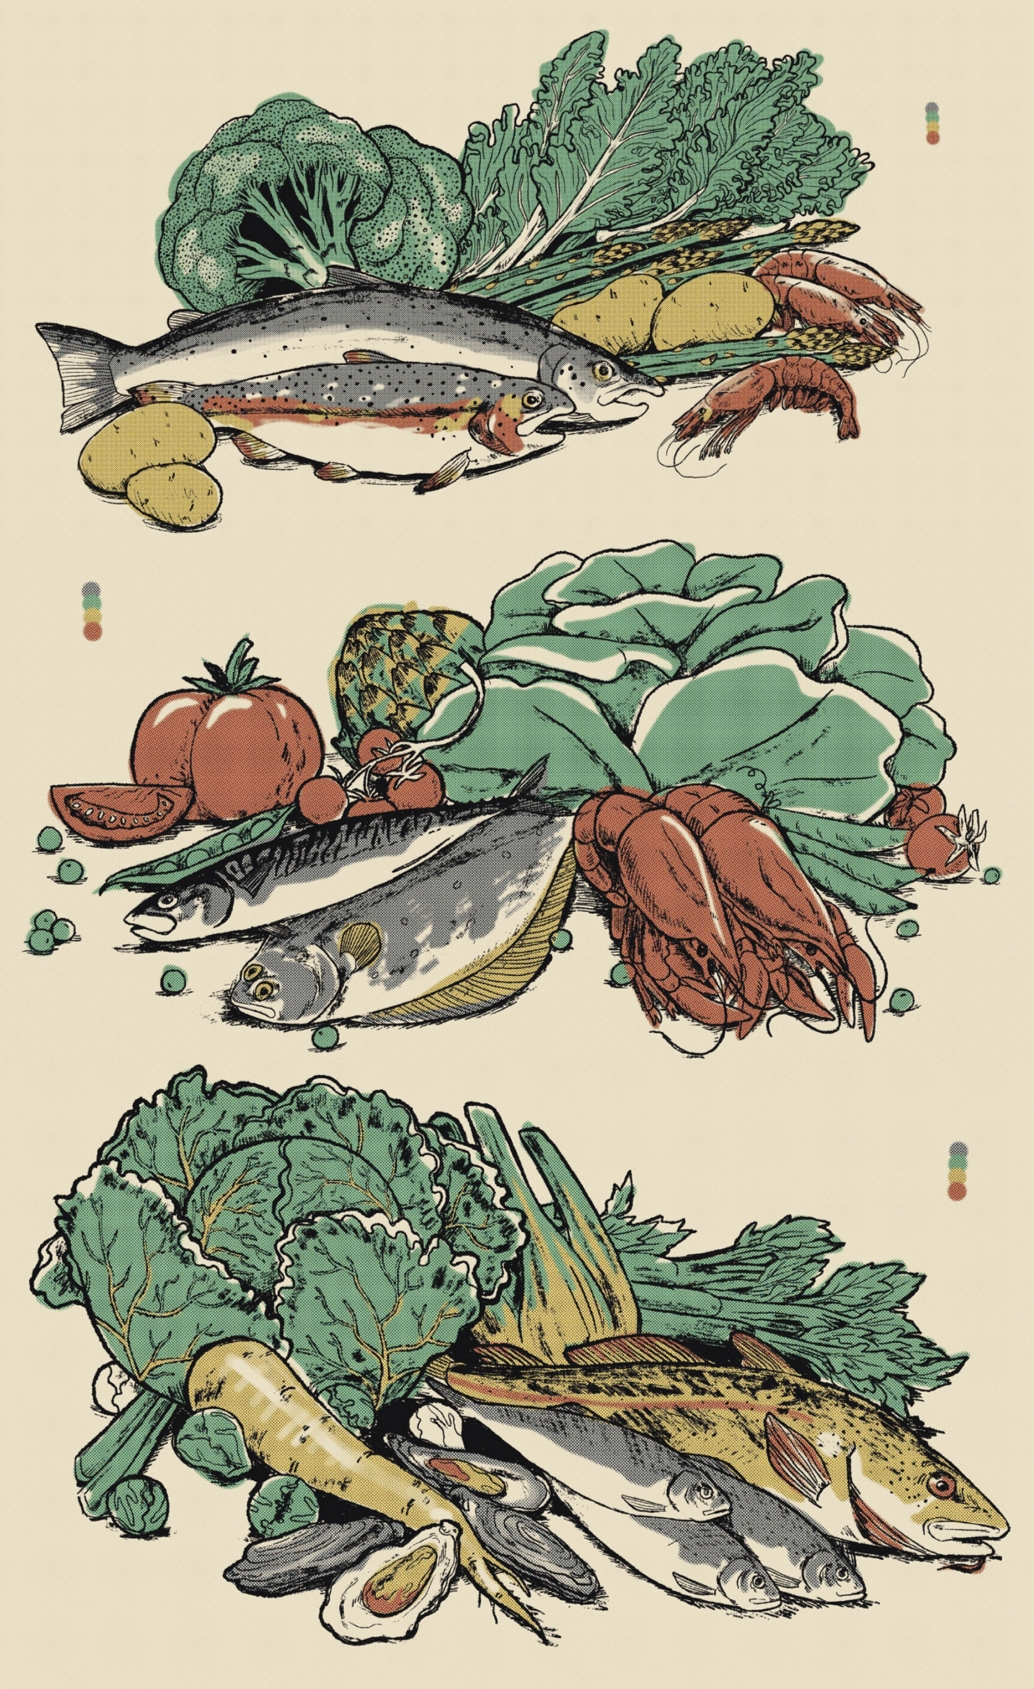 BA artwork by Joanna Asia Kazub. Four postcards showing different fresh products, such as fish and vegetables. The texture of colours give the illustration a vintage feel.